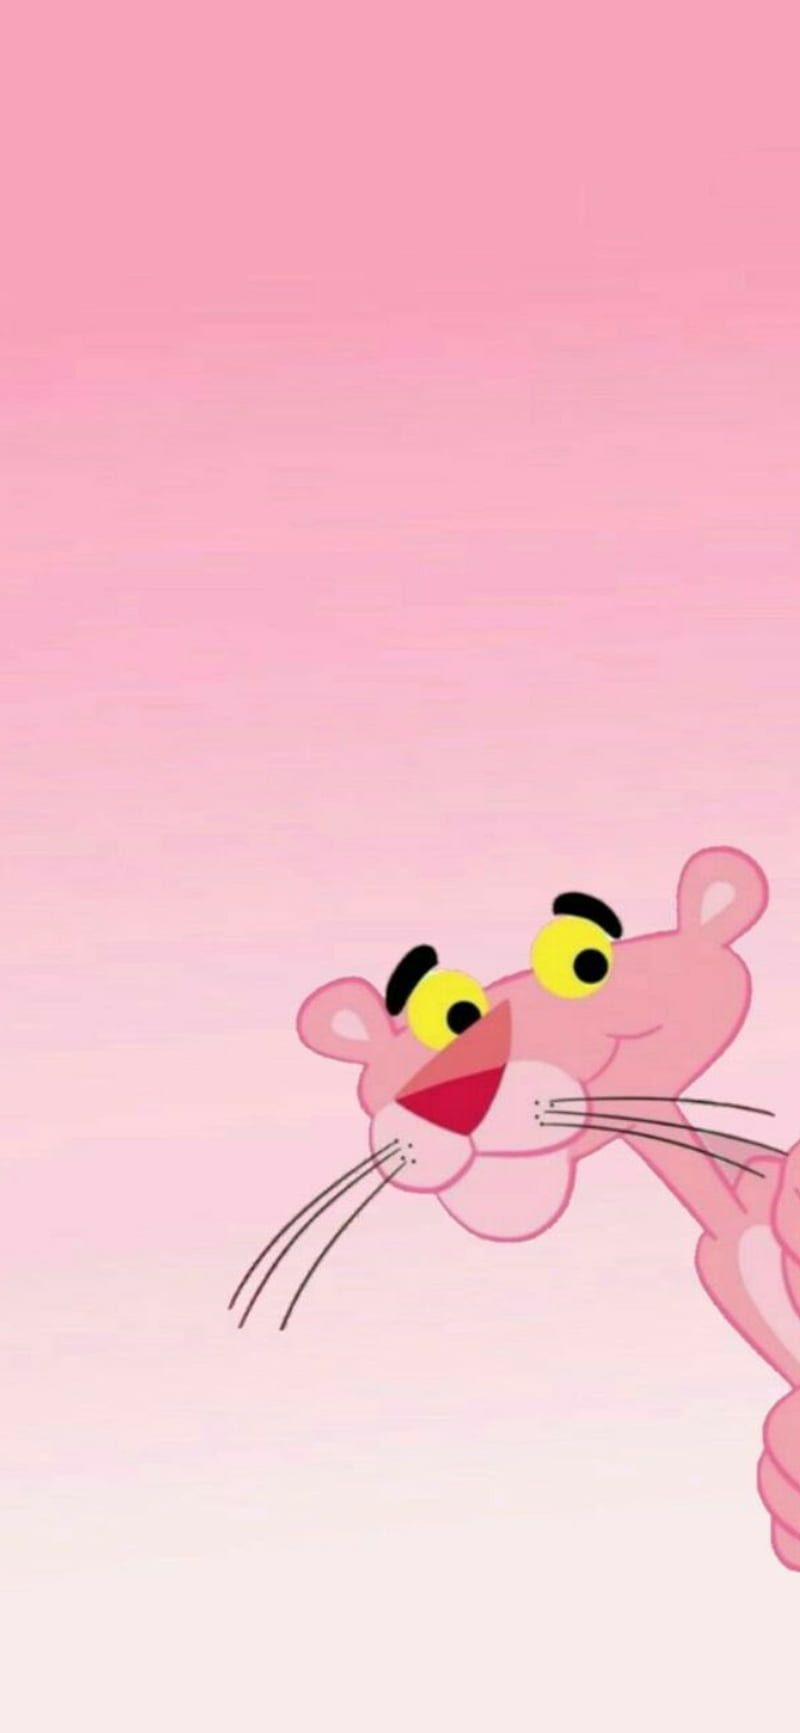 The pink panther cartoon character with a yellow nose - Pink Panther